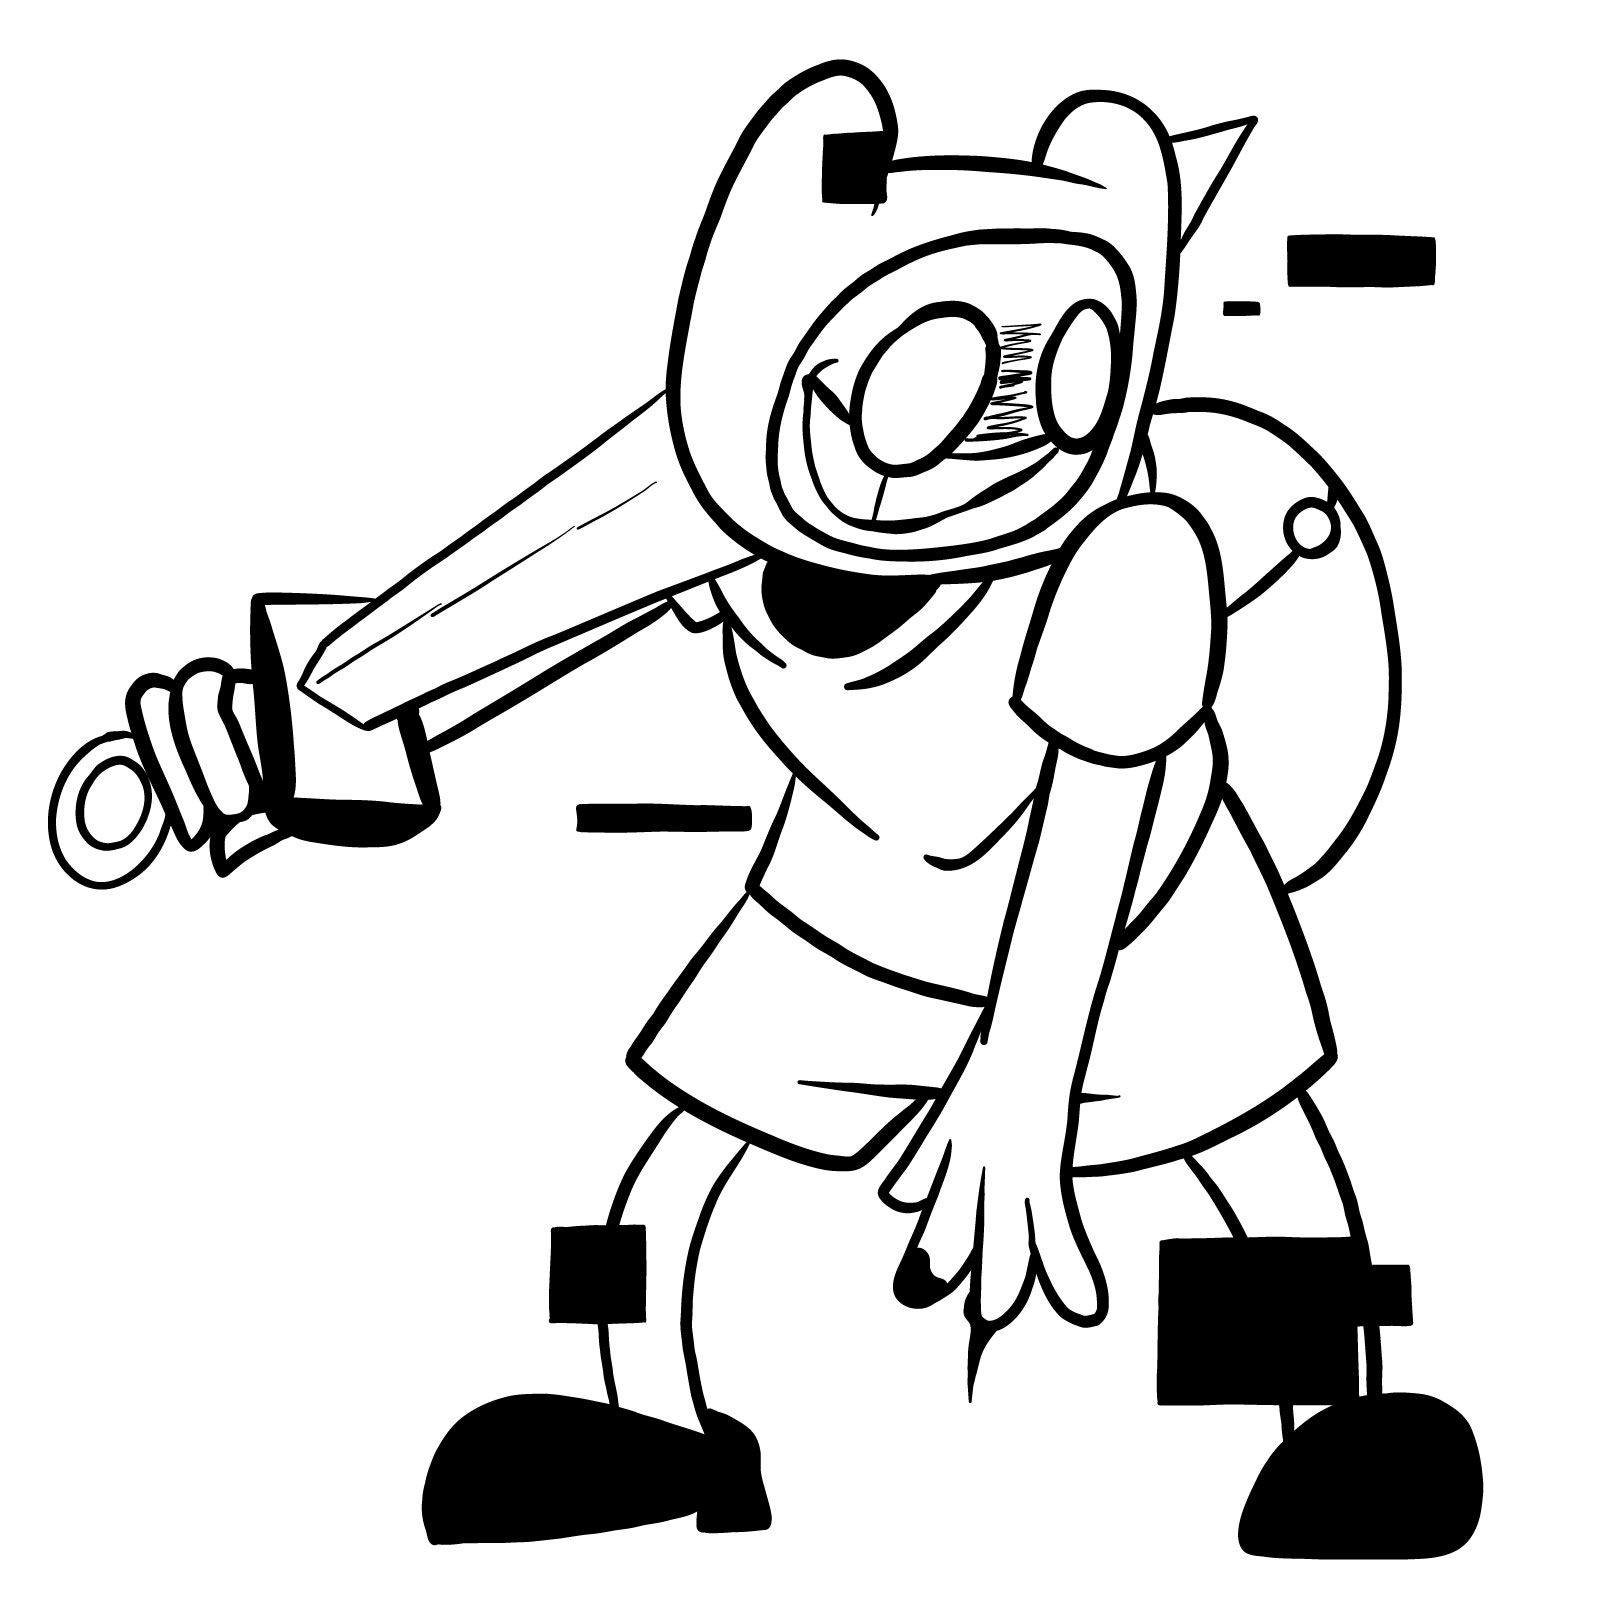 How to draw Finn - FNF: Pibby Corrupted - Sketchok easy drawing guides